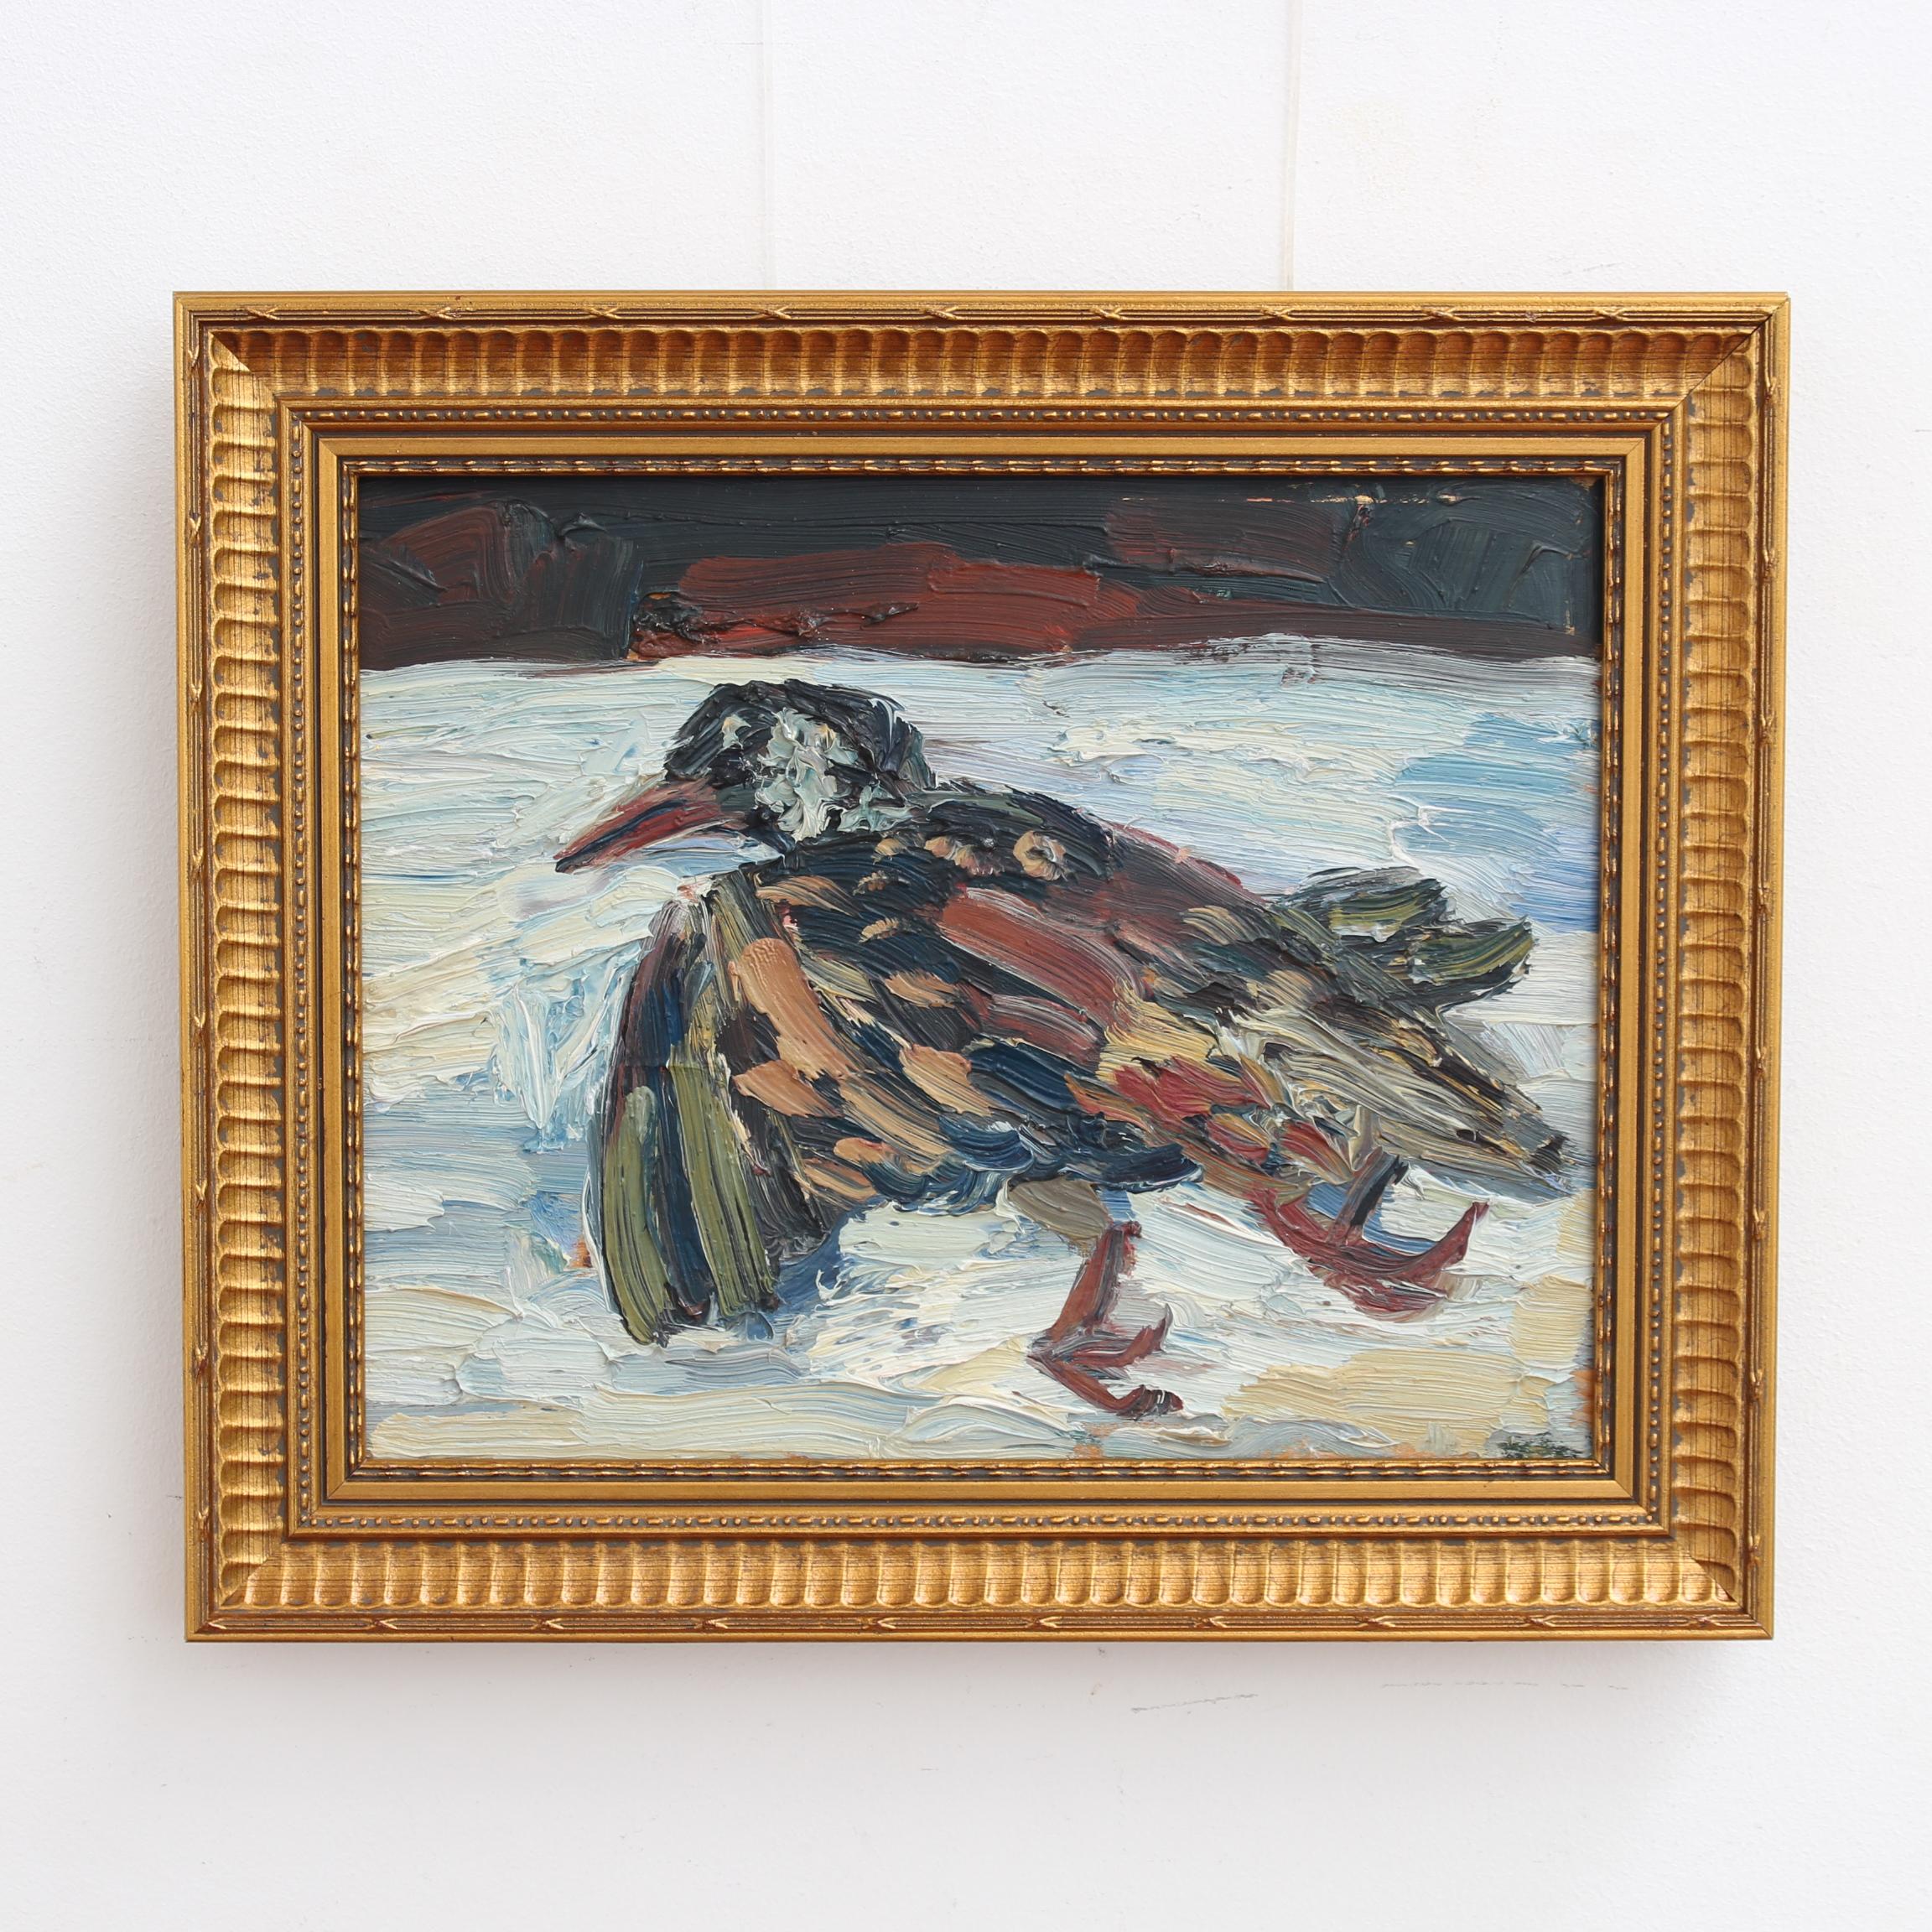 'Portrait of a Bird in Snow', oil on board, by Anna Costa (circa 1960s). This is a unique still-life painted by the artist in warm colours in an Impressionist style. In ancient cultures such as Greece, a dead bird was seen as a sign of good luck and